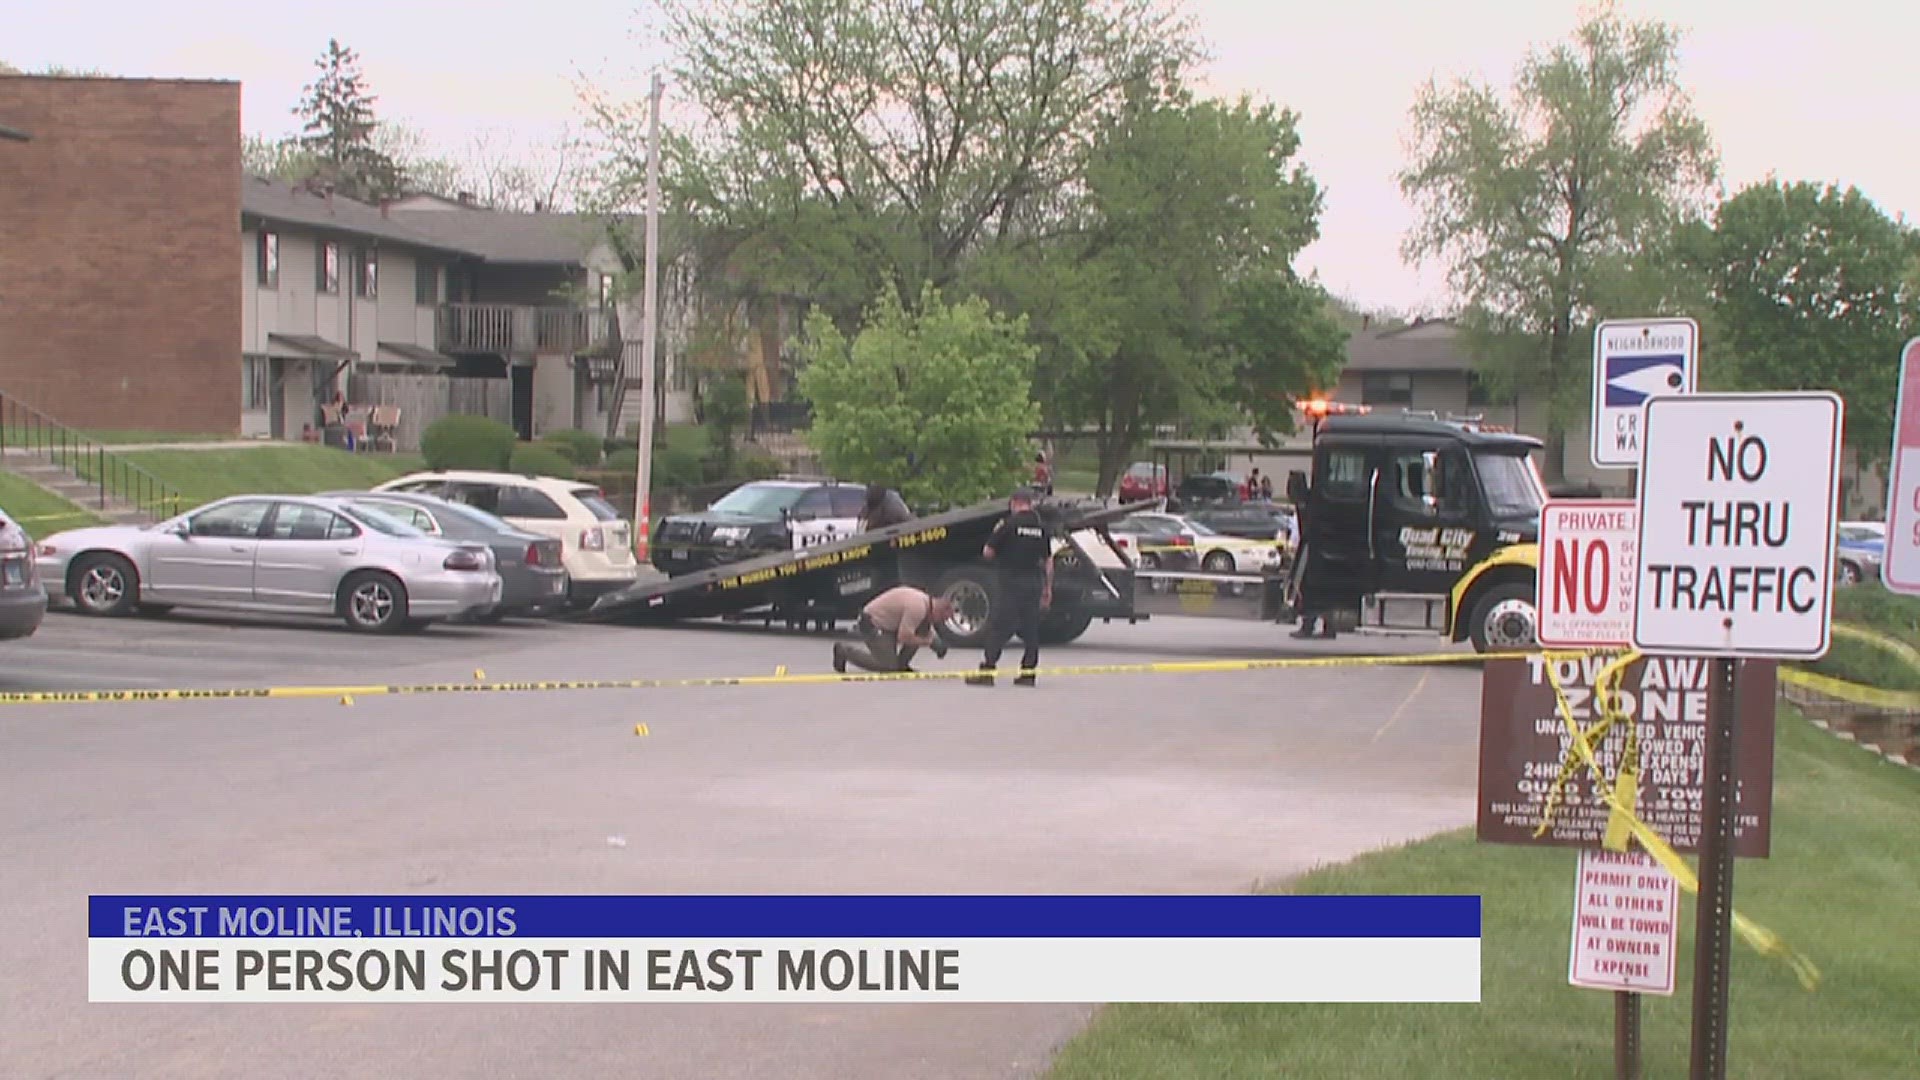 The East Moline Police Department is still investigating the shooting, which happened at Blackhawk Hills Apartments.